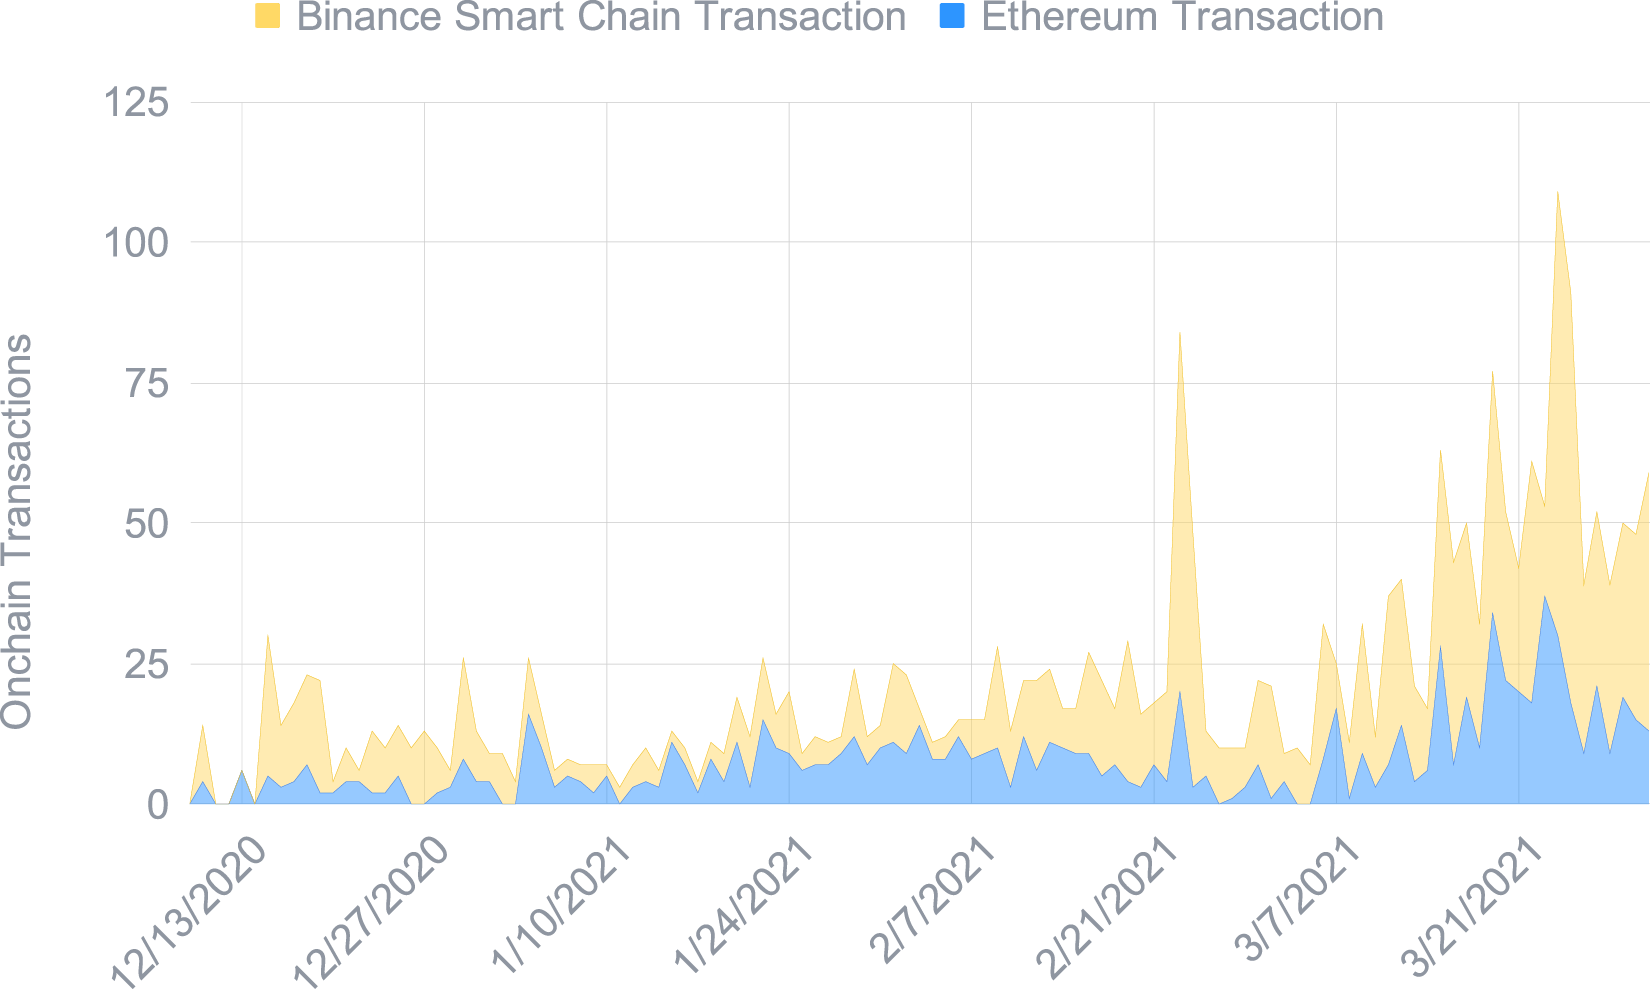 The Smart Yield strategy optimiser transactions over time